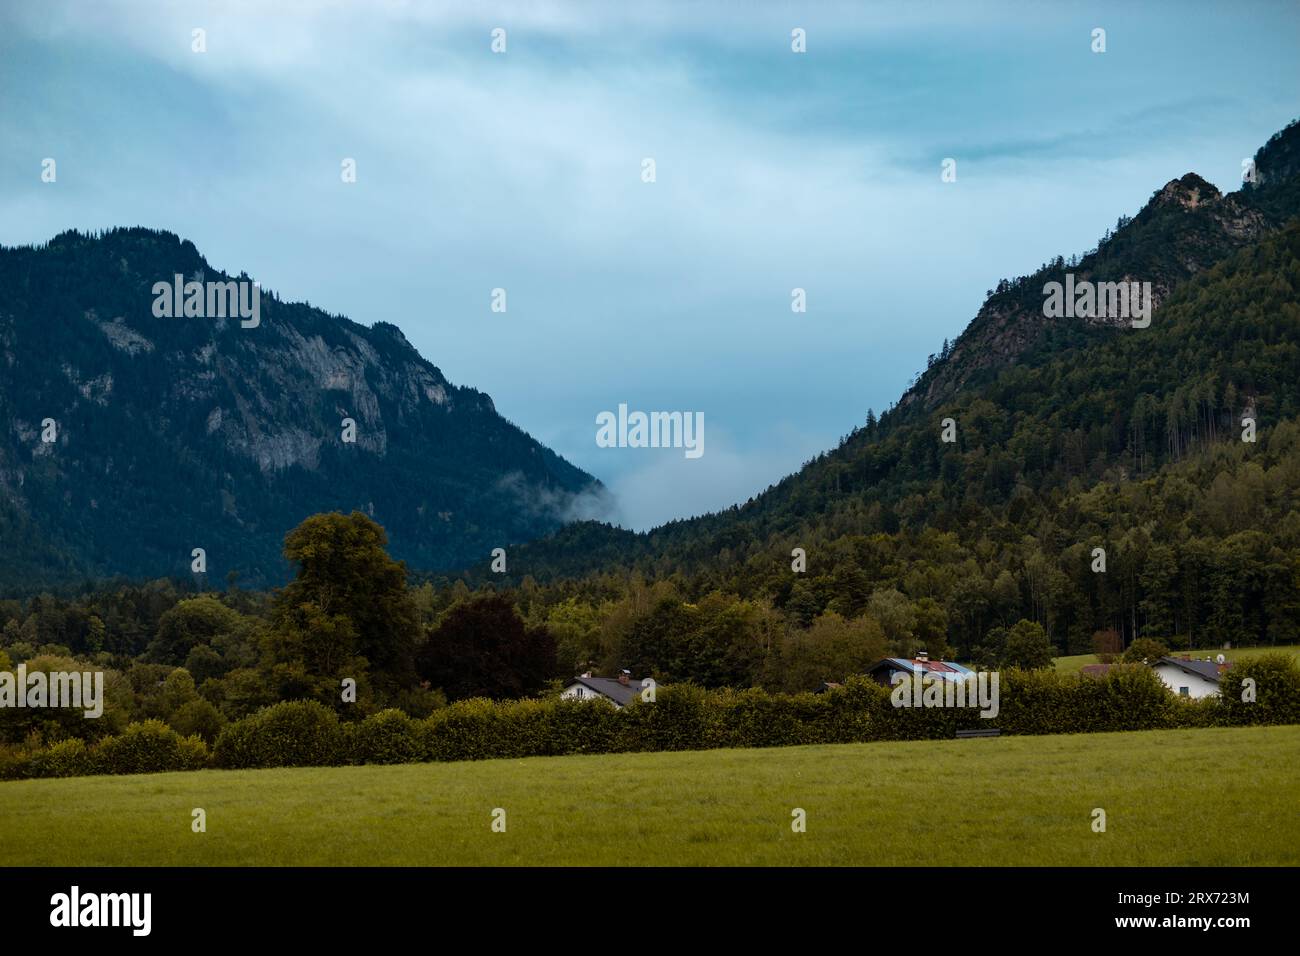 Misty clouds in between the mountains moving into the valley. Rainy weather at the German Alps region. Water vapor from the forest is in the air. Stock Photo